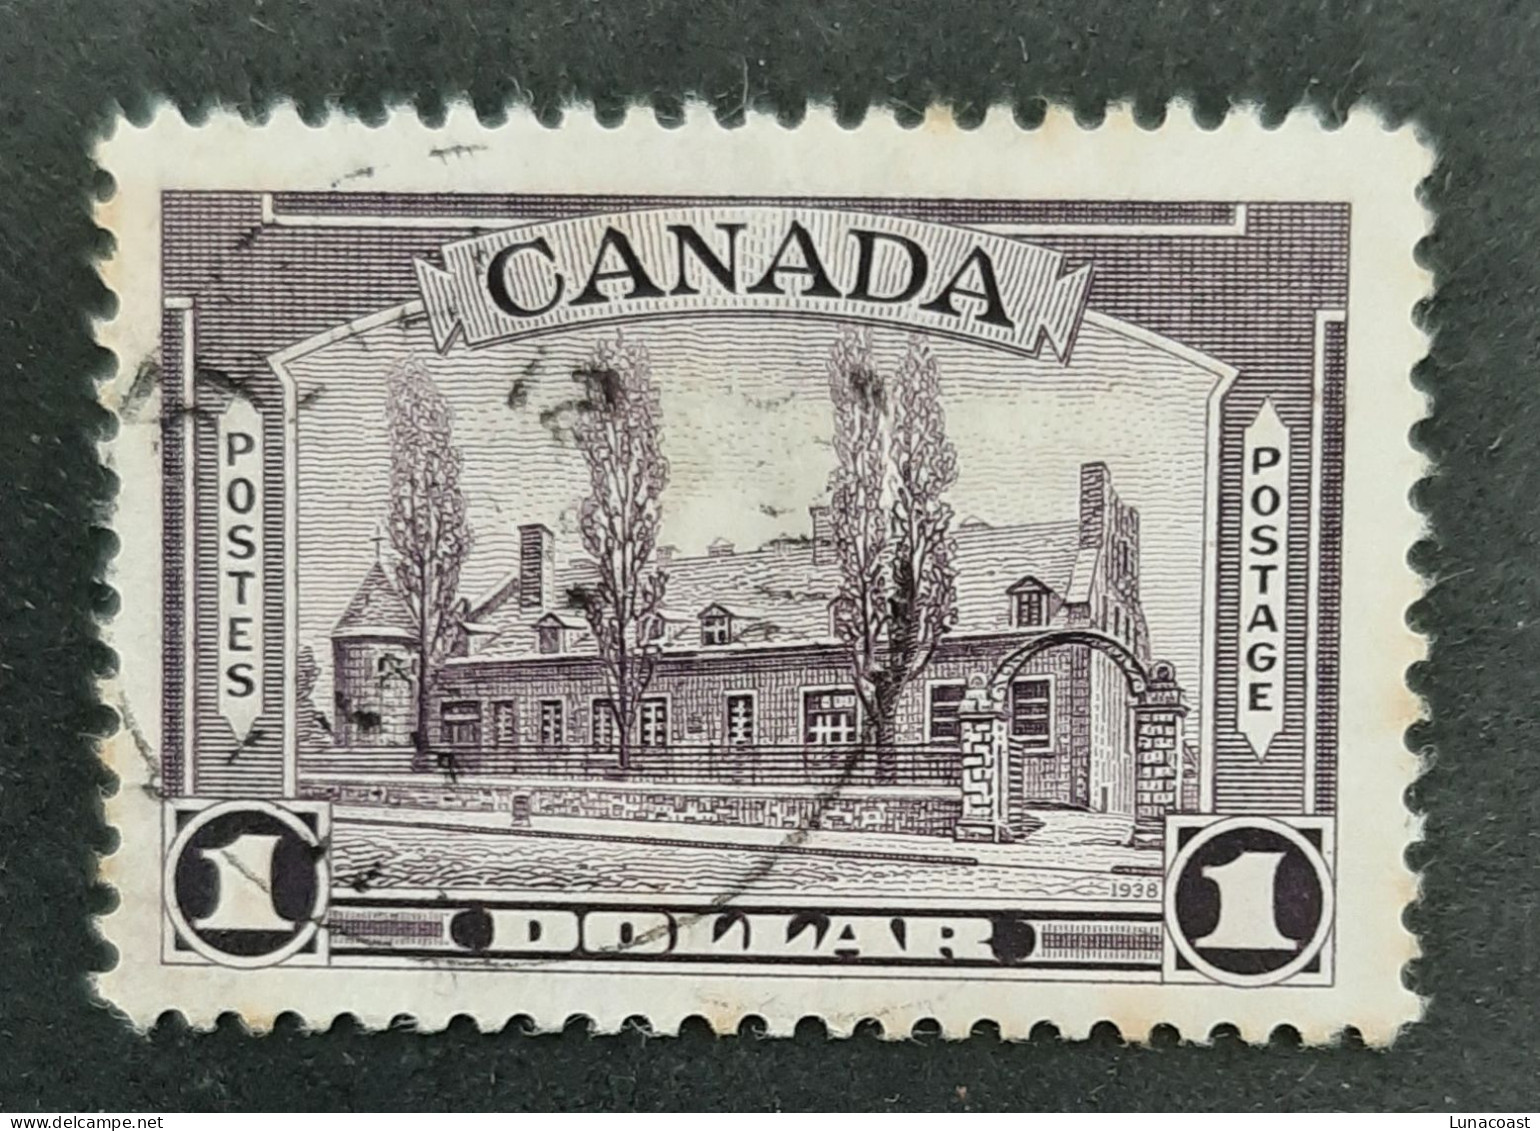 Canada 1938  USED  Sc 245,    1$ Pictorial Issue, Chateuau De Ramezay - Used Stamps